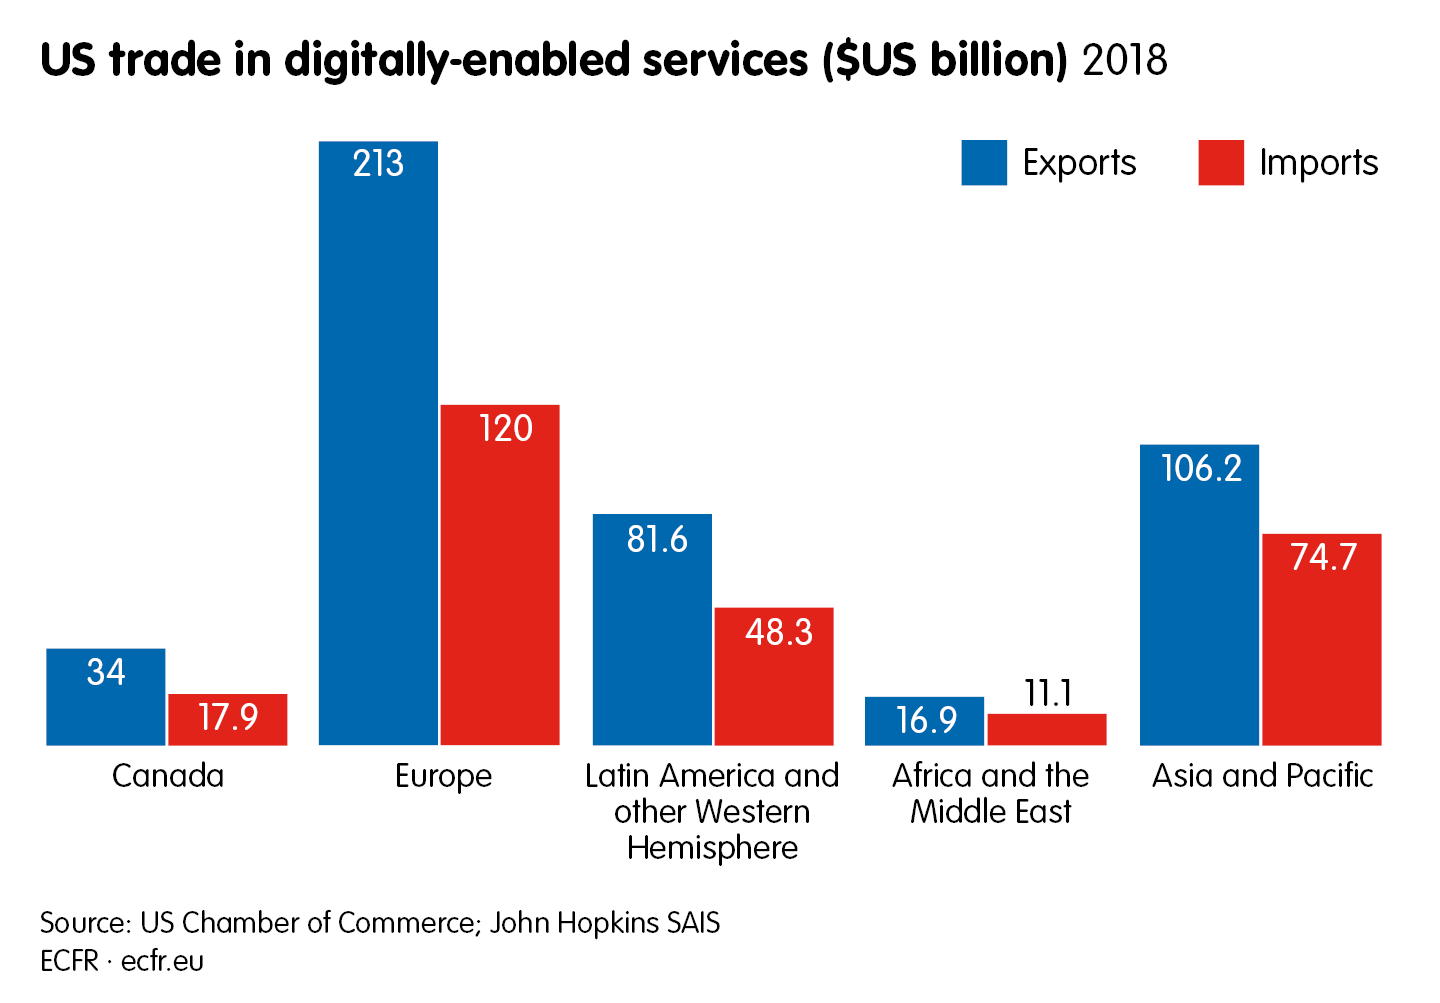 US trade in digitally-enabled services ($US billion) in 2018